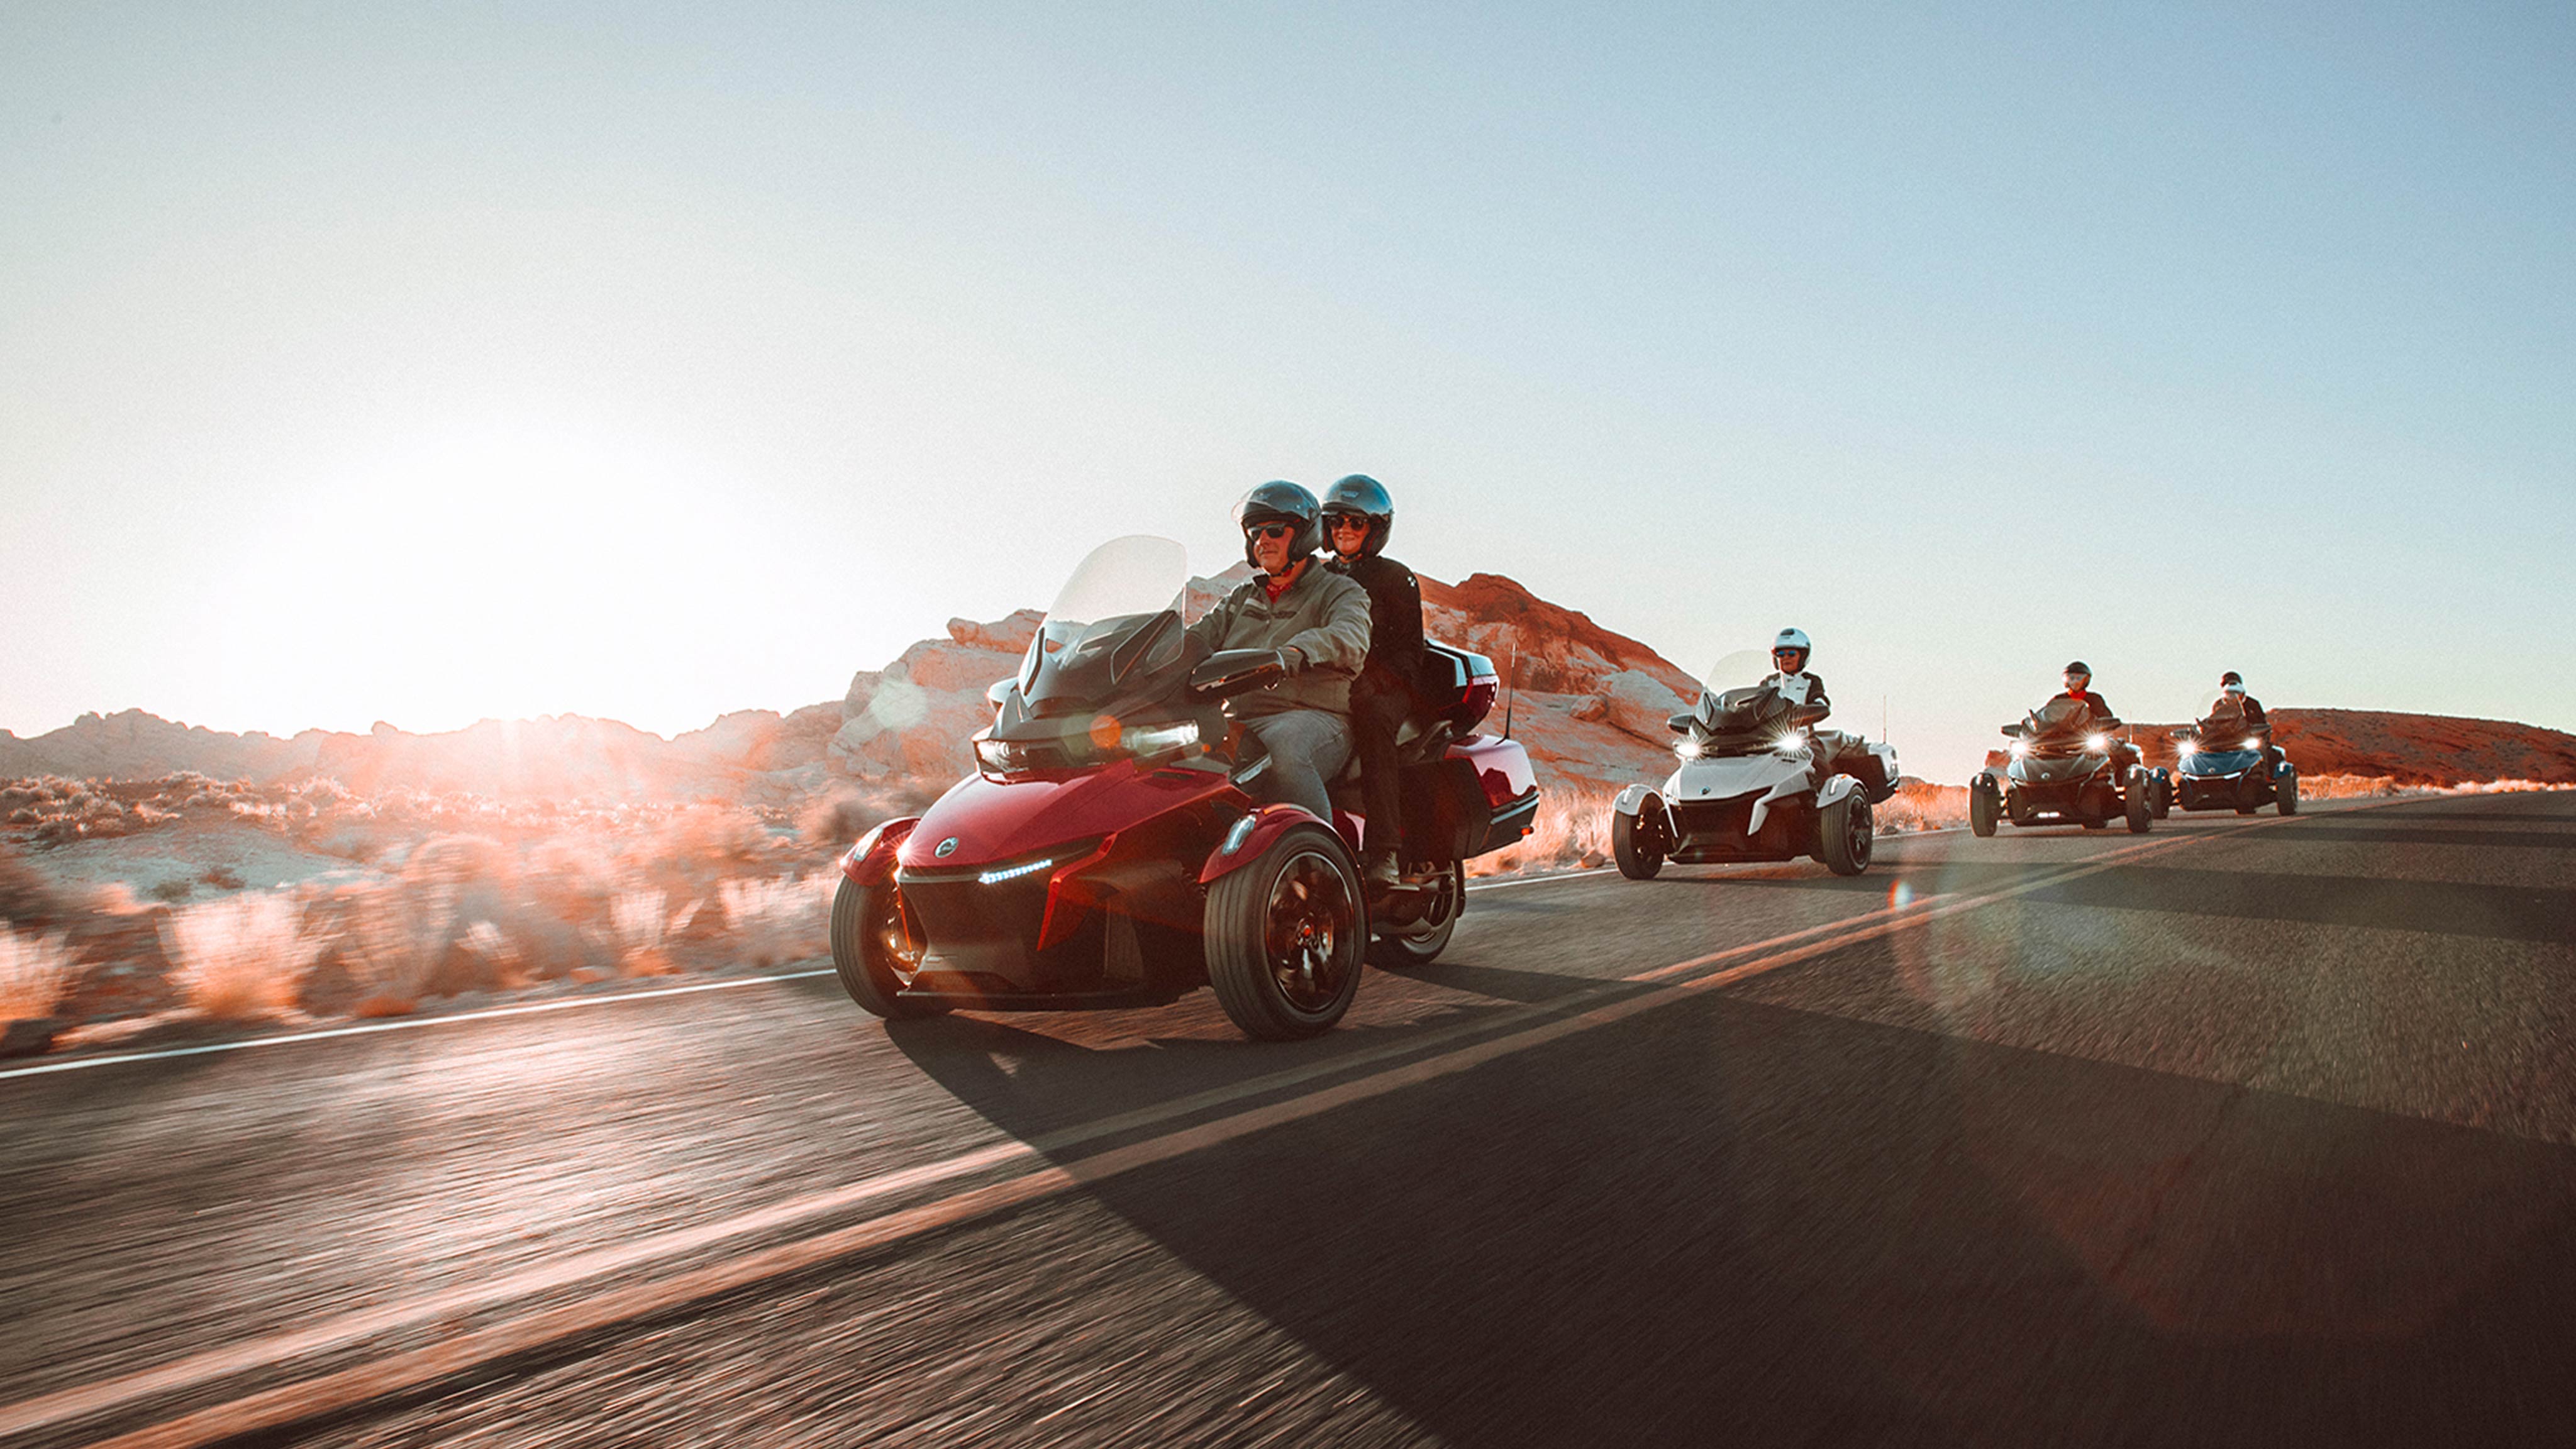 Group of 3-wheel riders riding on their Can-Am On-Road vehicles